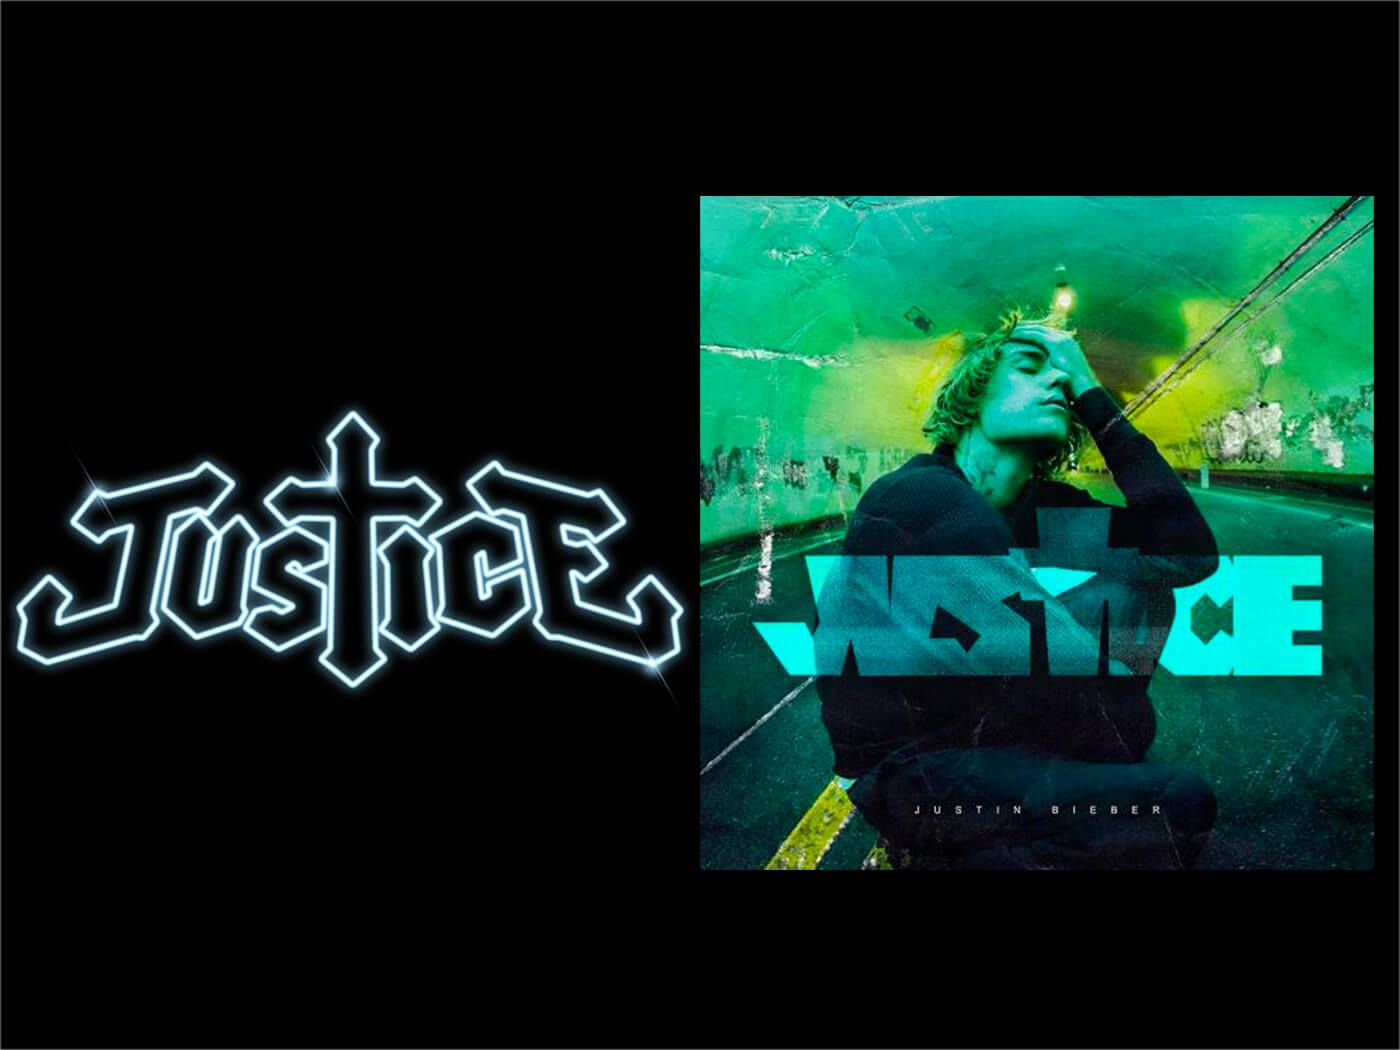 Justice take legal action against Justin Bieber over album design: “This is textbook bad faith and wilful infringement”